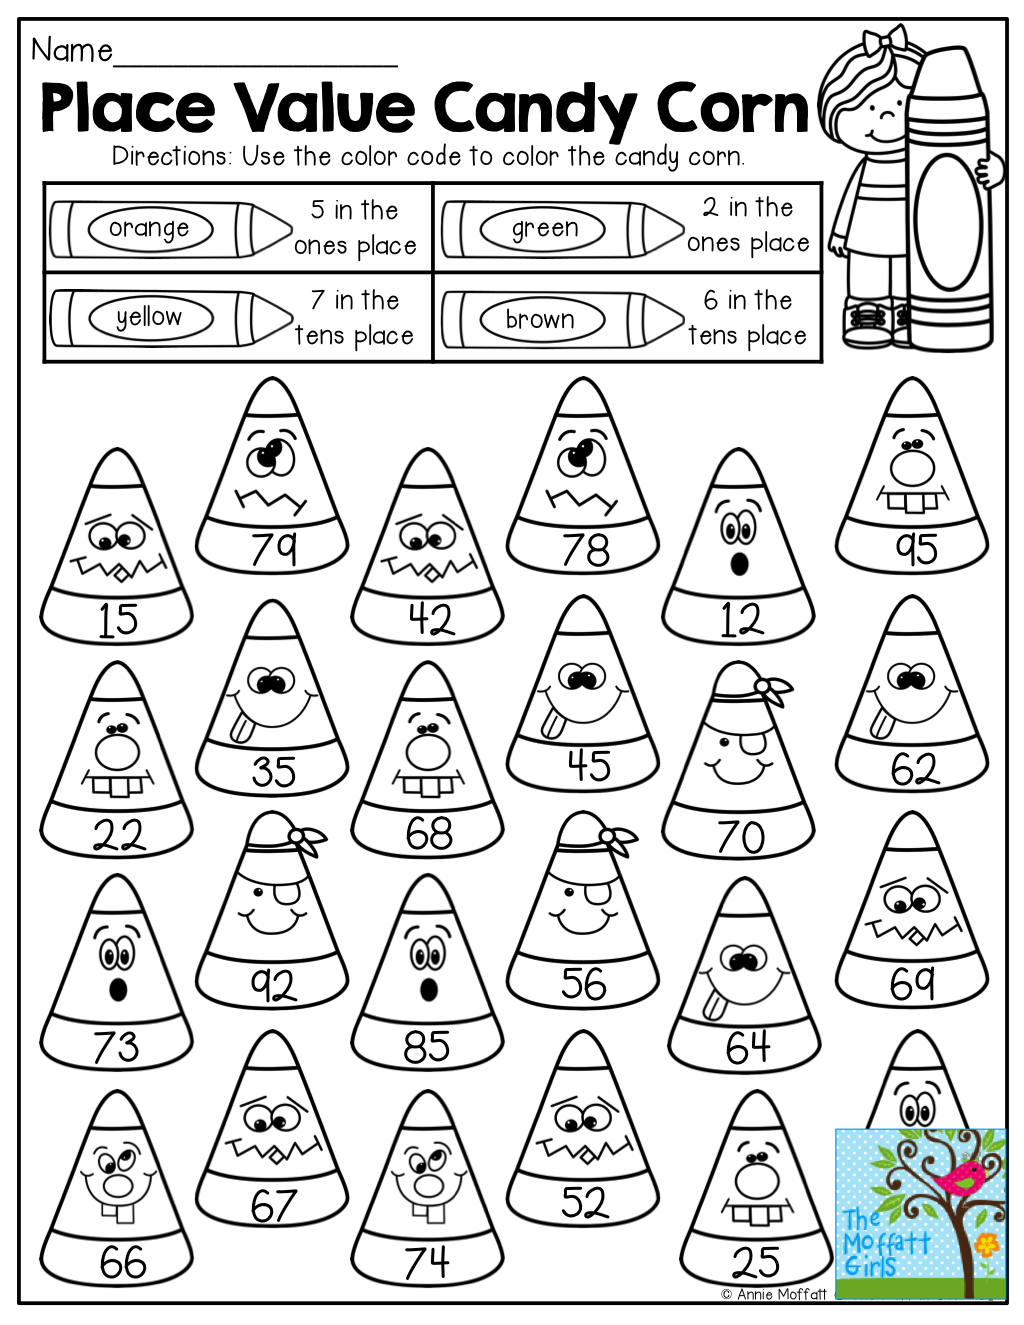 Place Value Candy Corn and TONS of other fun printables for October!